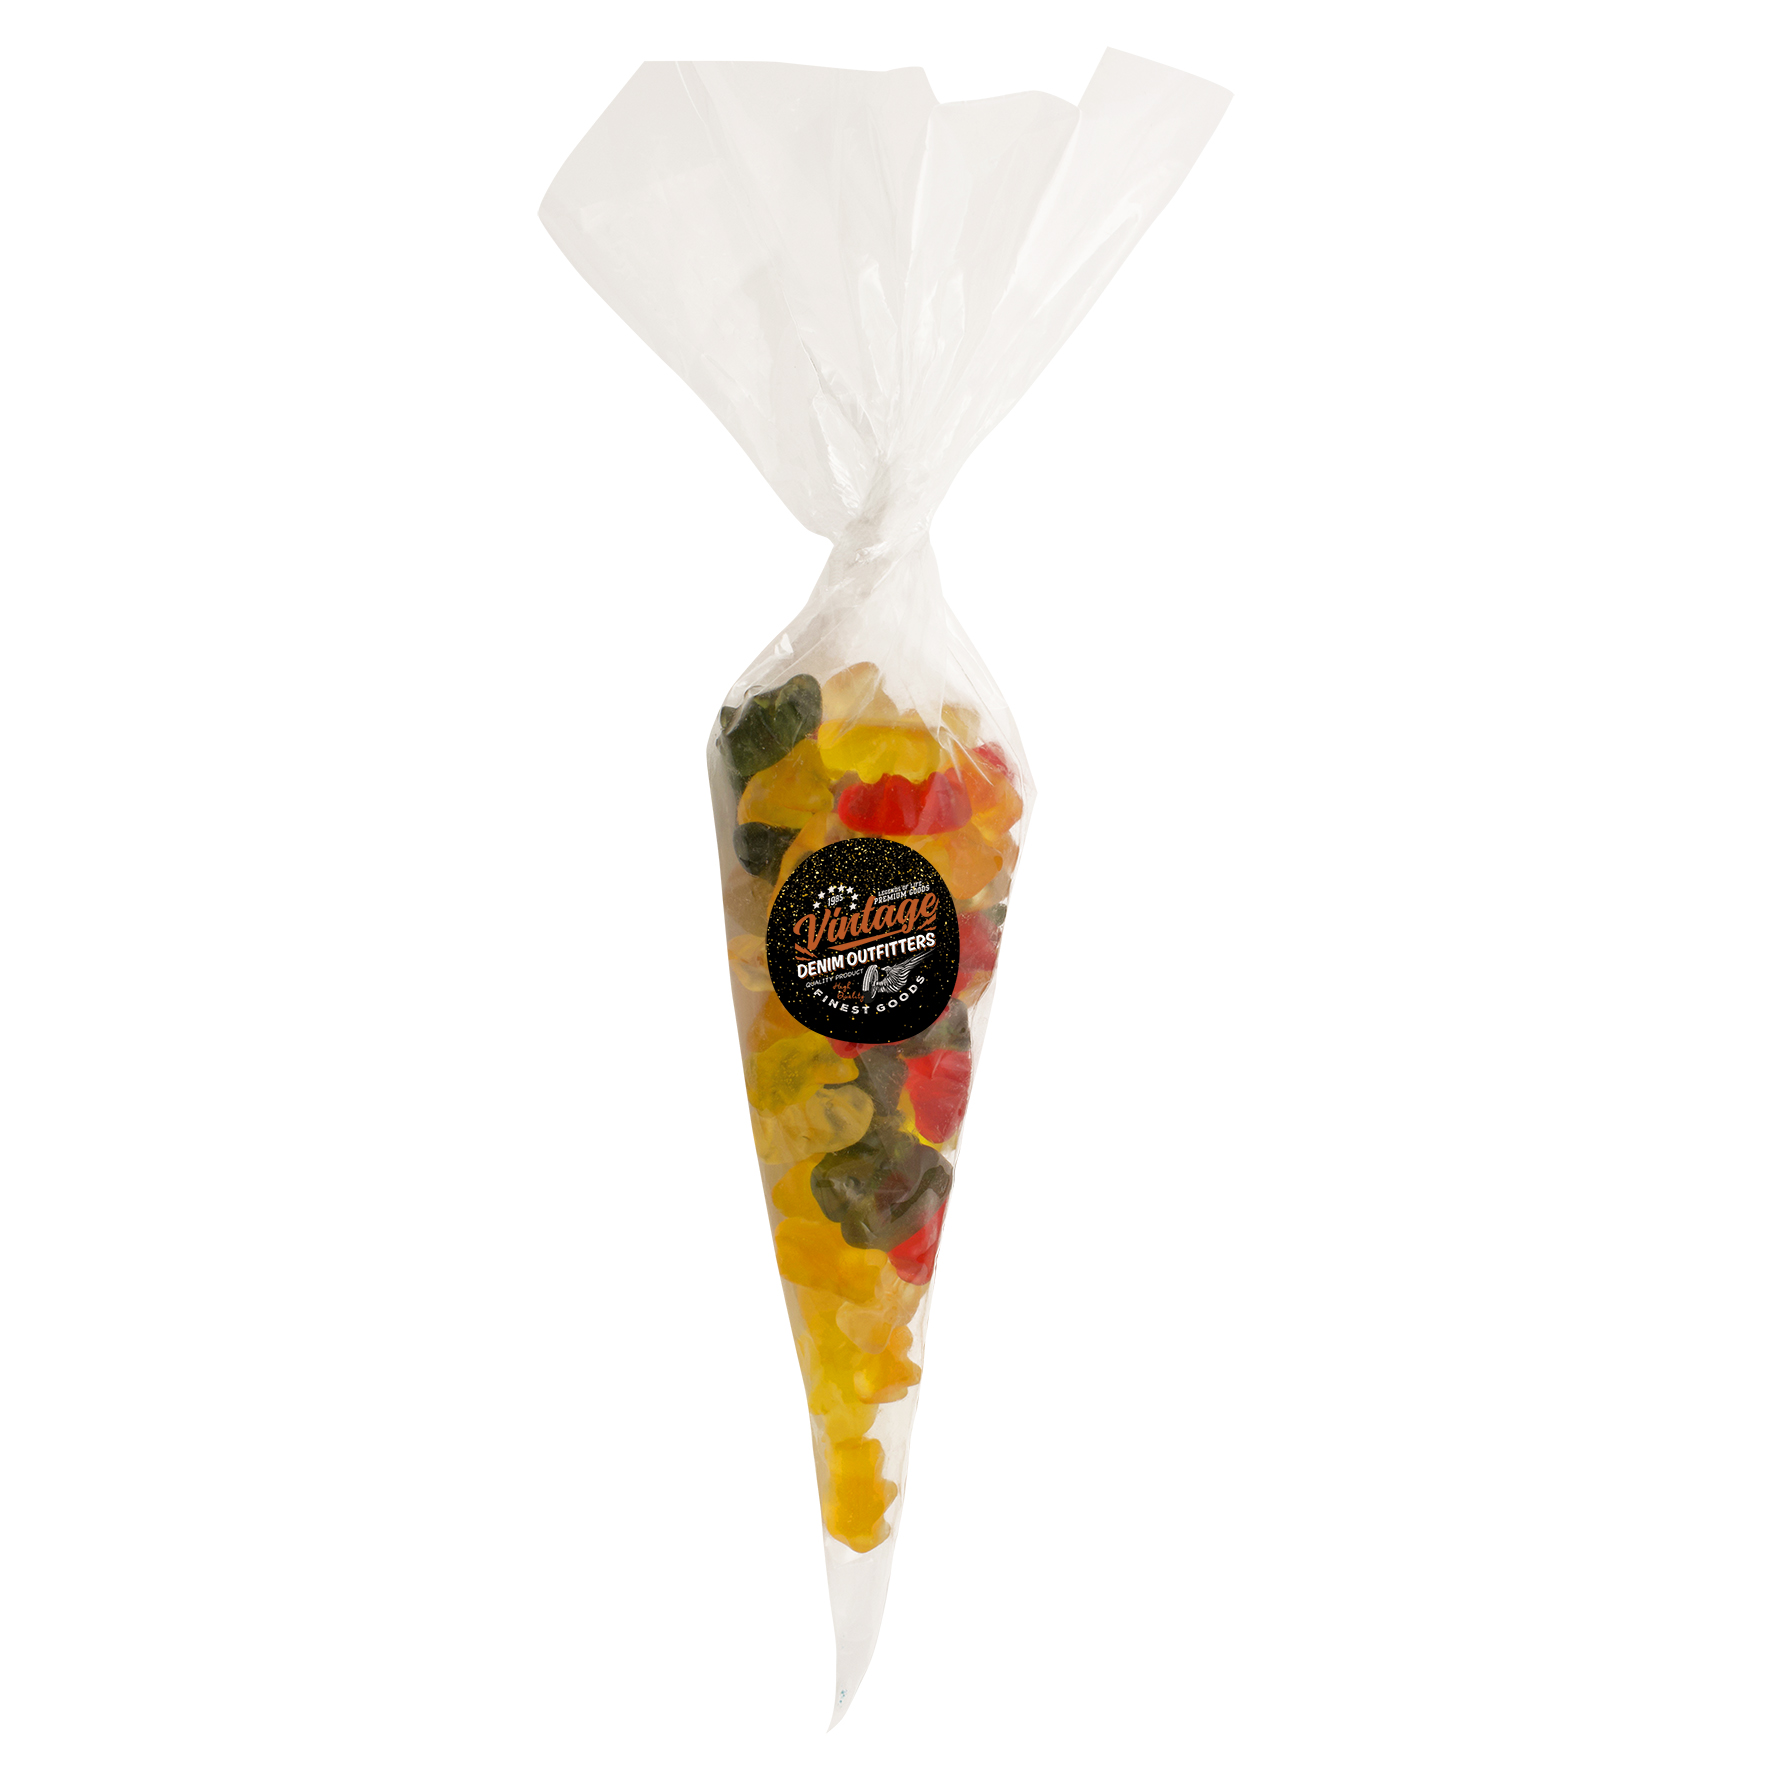 c 0605gb 00 09 - Sweet cones with jelly beans (200g)